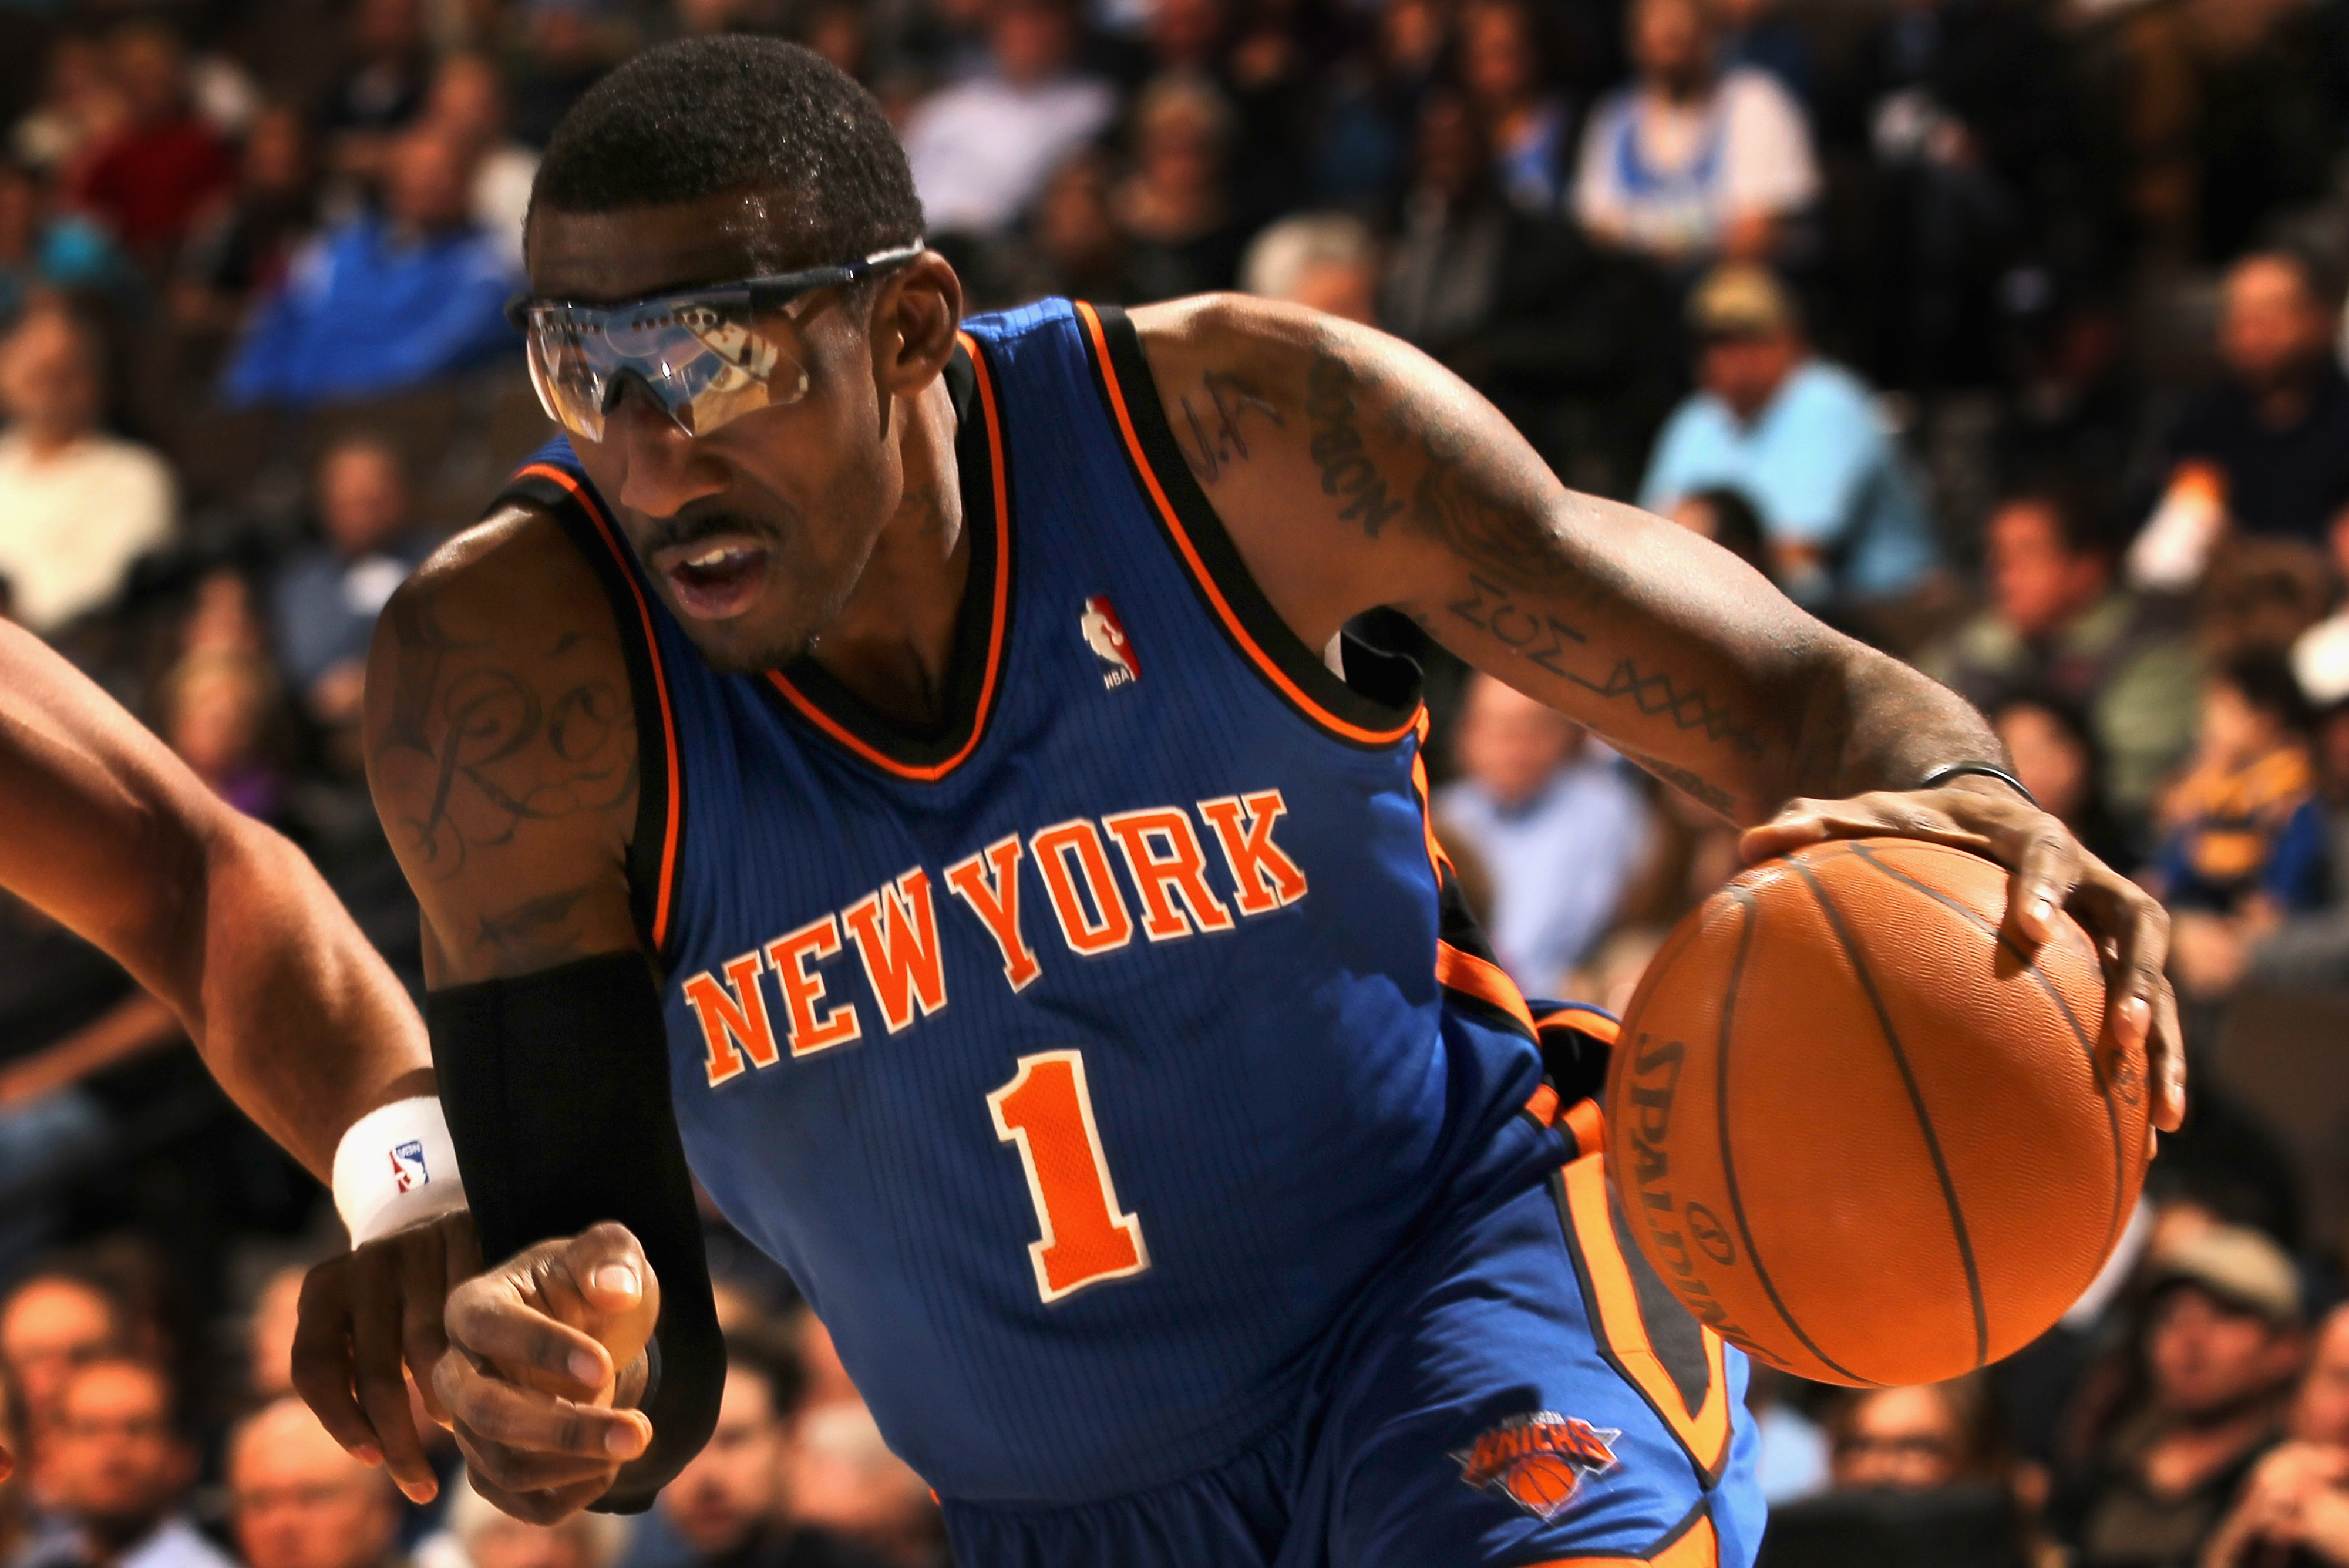 New York Knicks Amar'e Stoudemire dunks the basketball in the first half  against the Utah